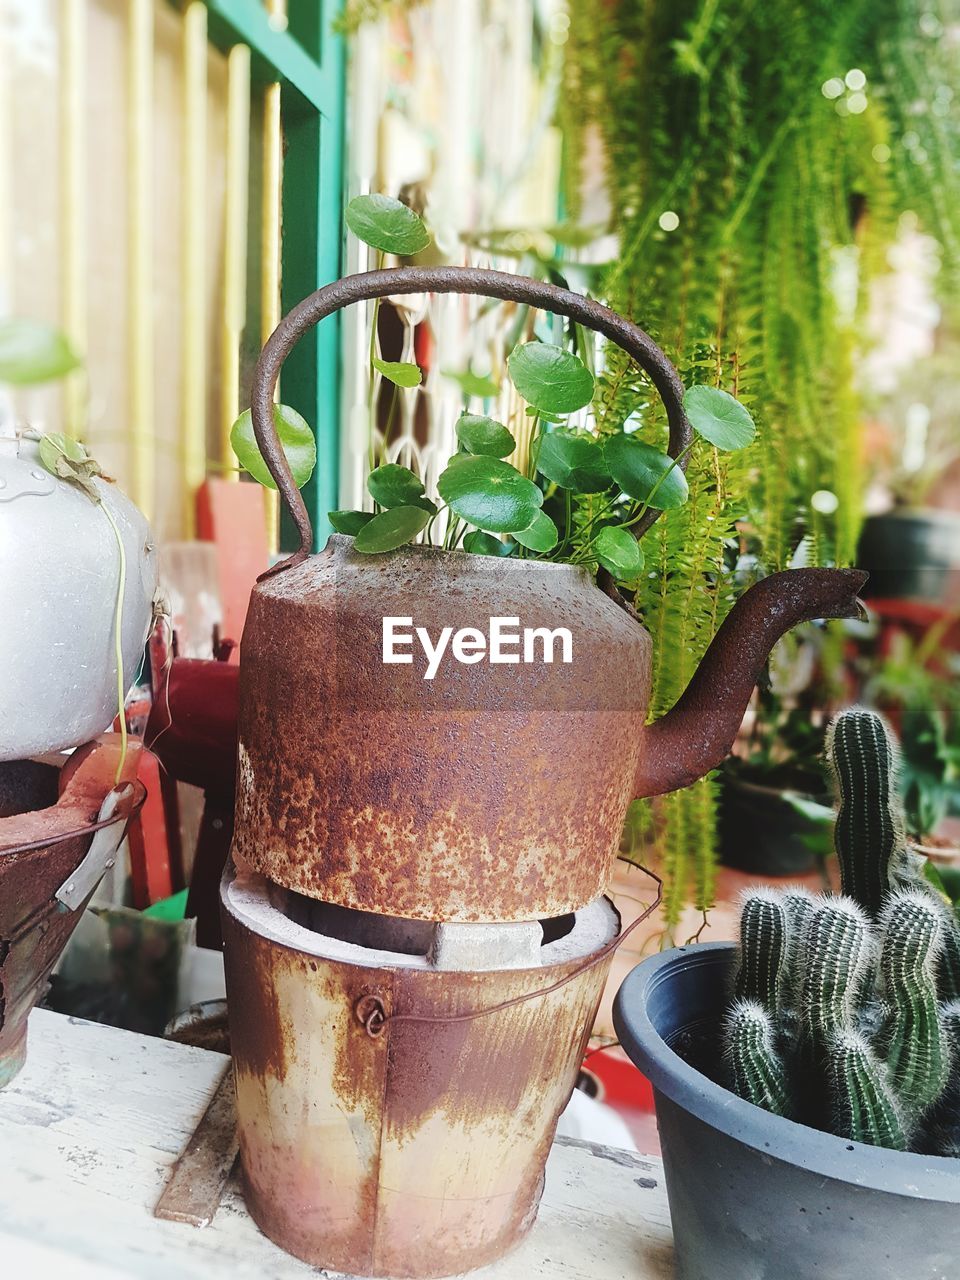 CLOSE-UP OF POTTED PLANT ON TABLE BY POT